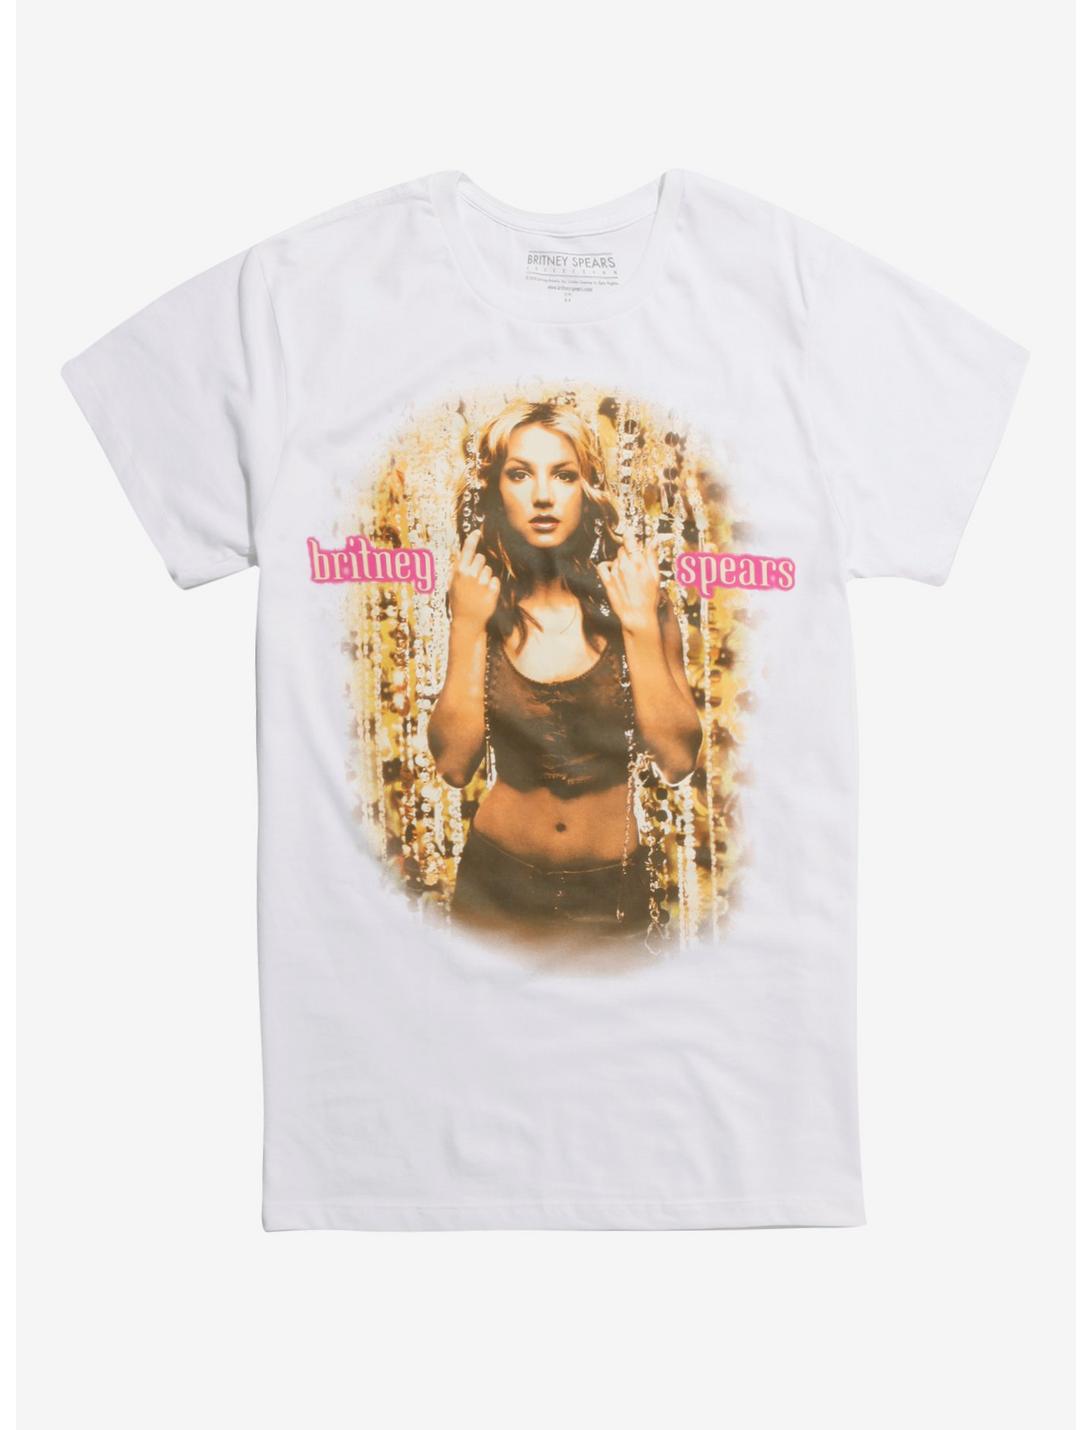 Britney Spears Oops... I Did It Again T-Shirt, WHITE, hi-res